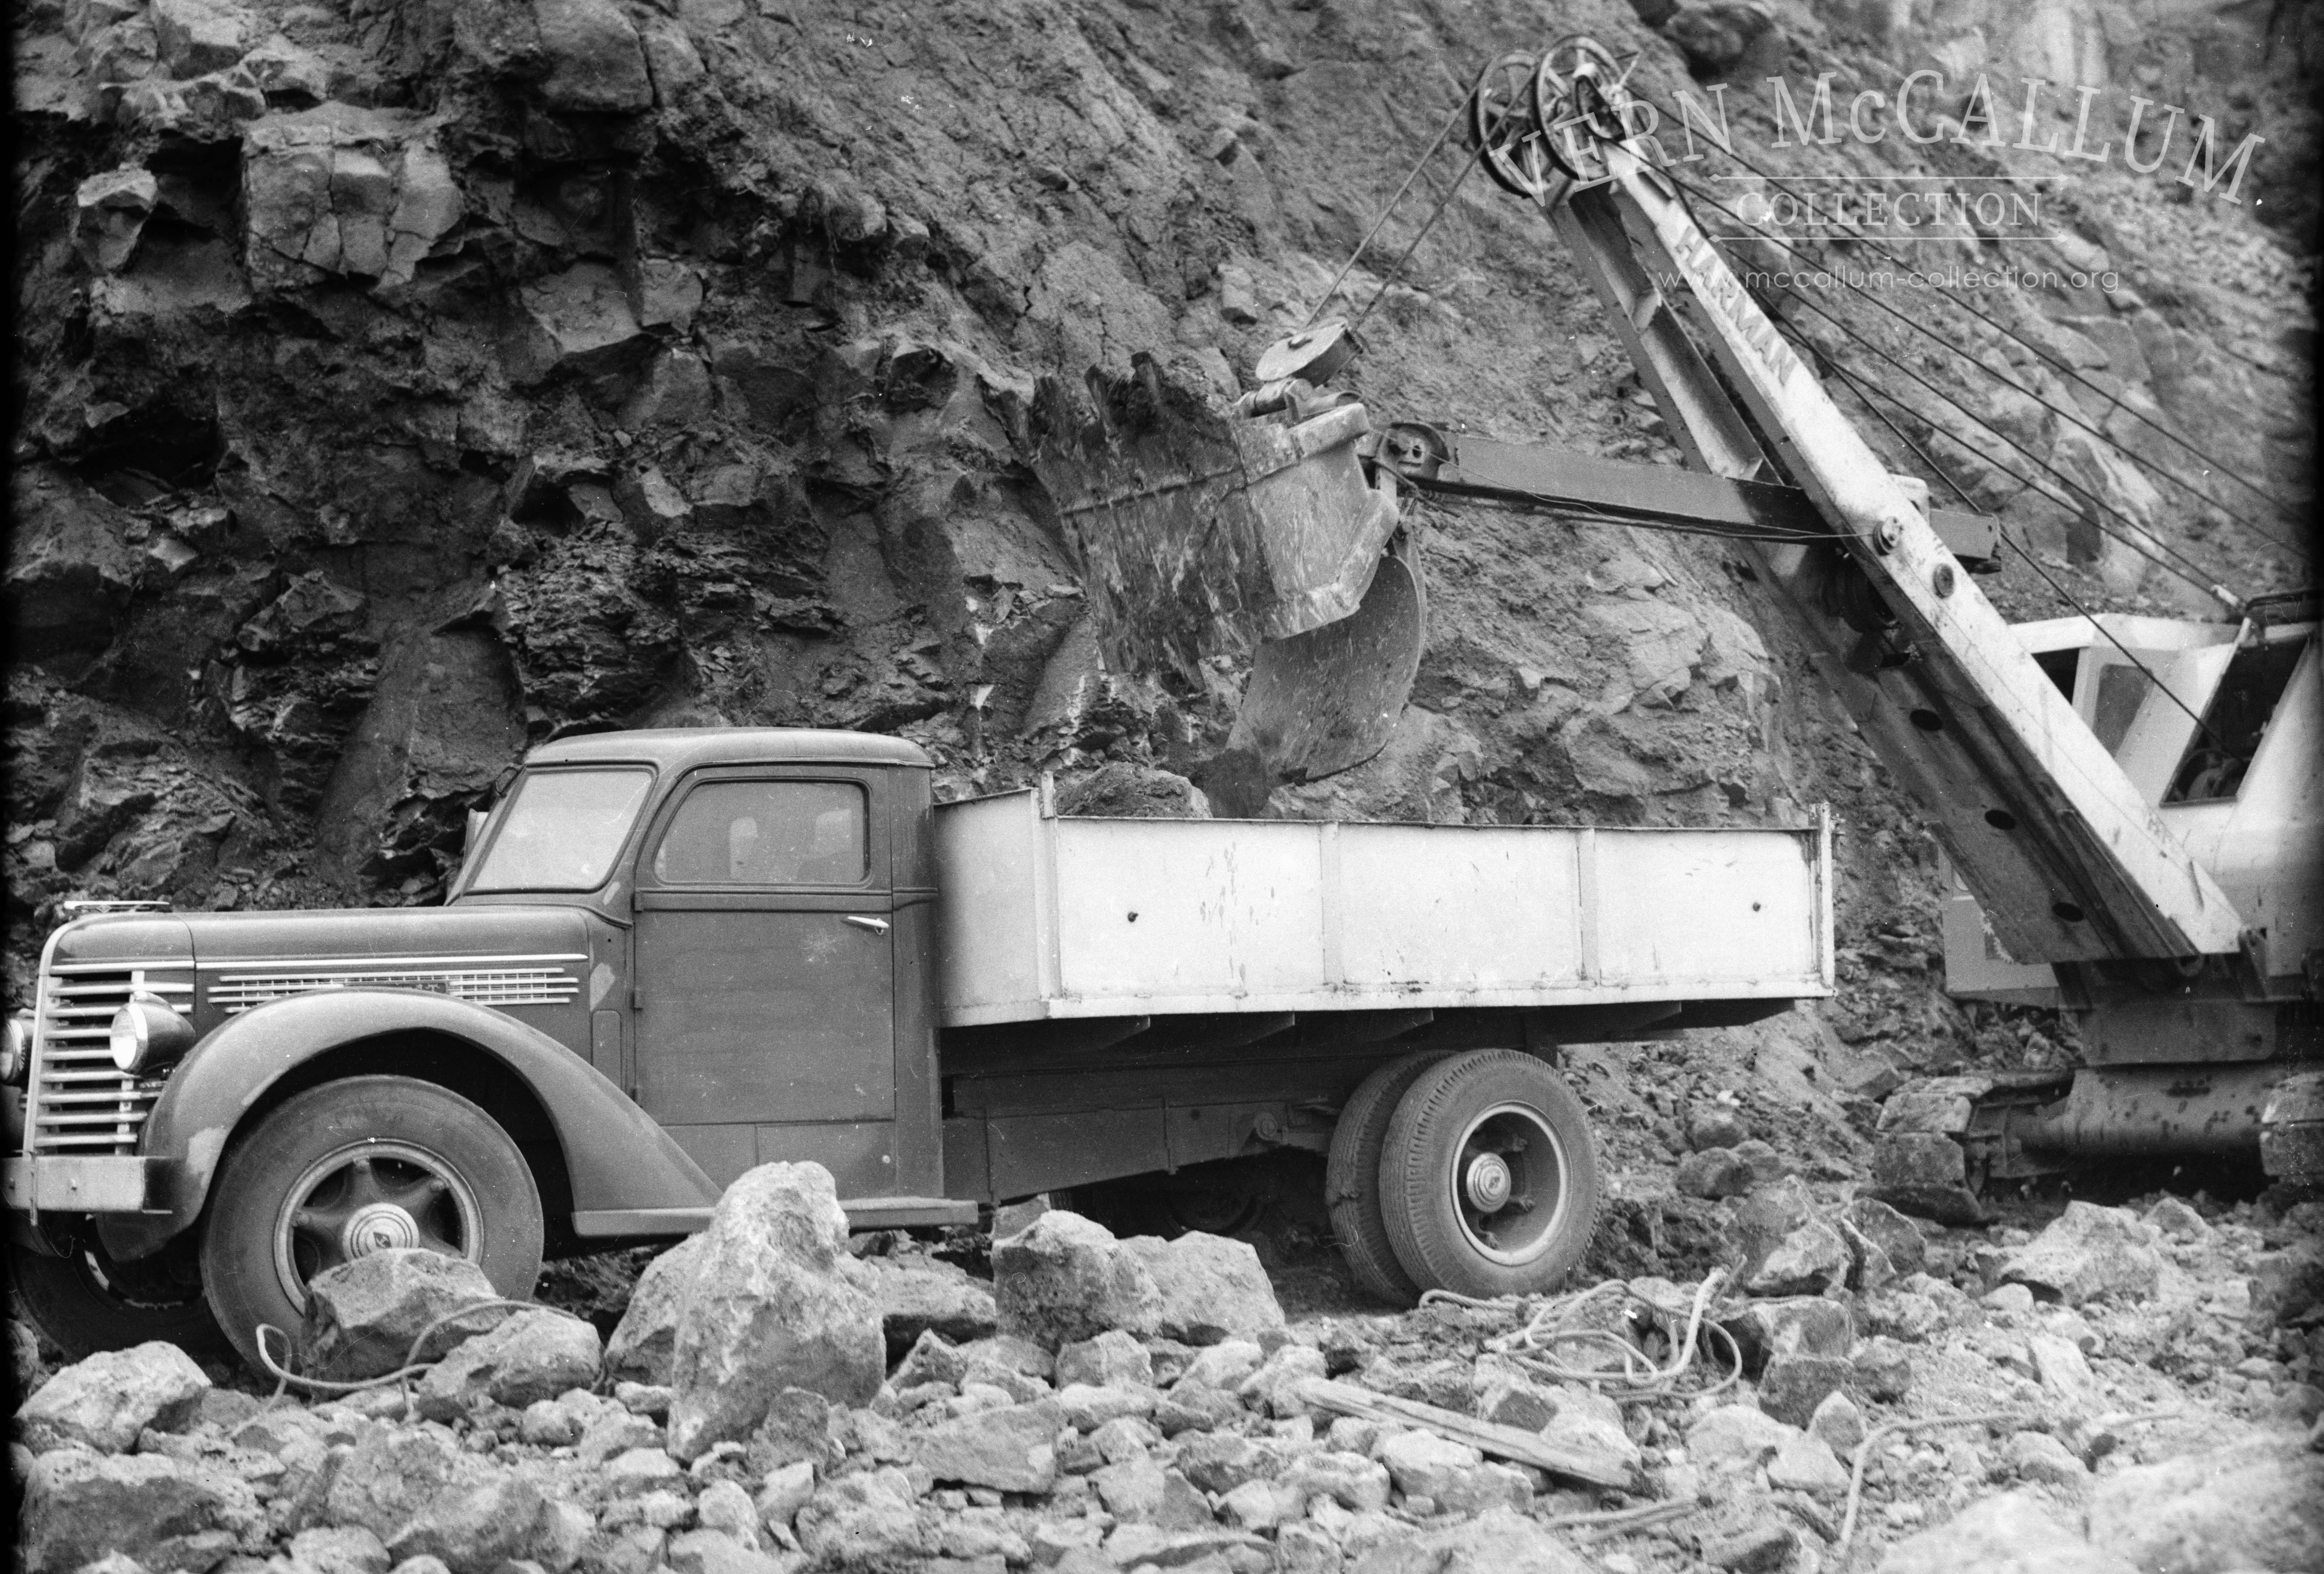 Loading  truck with dirt and rocks.